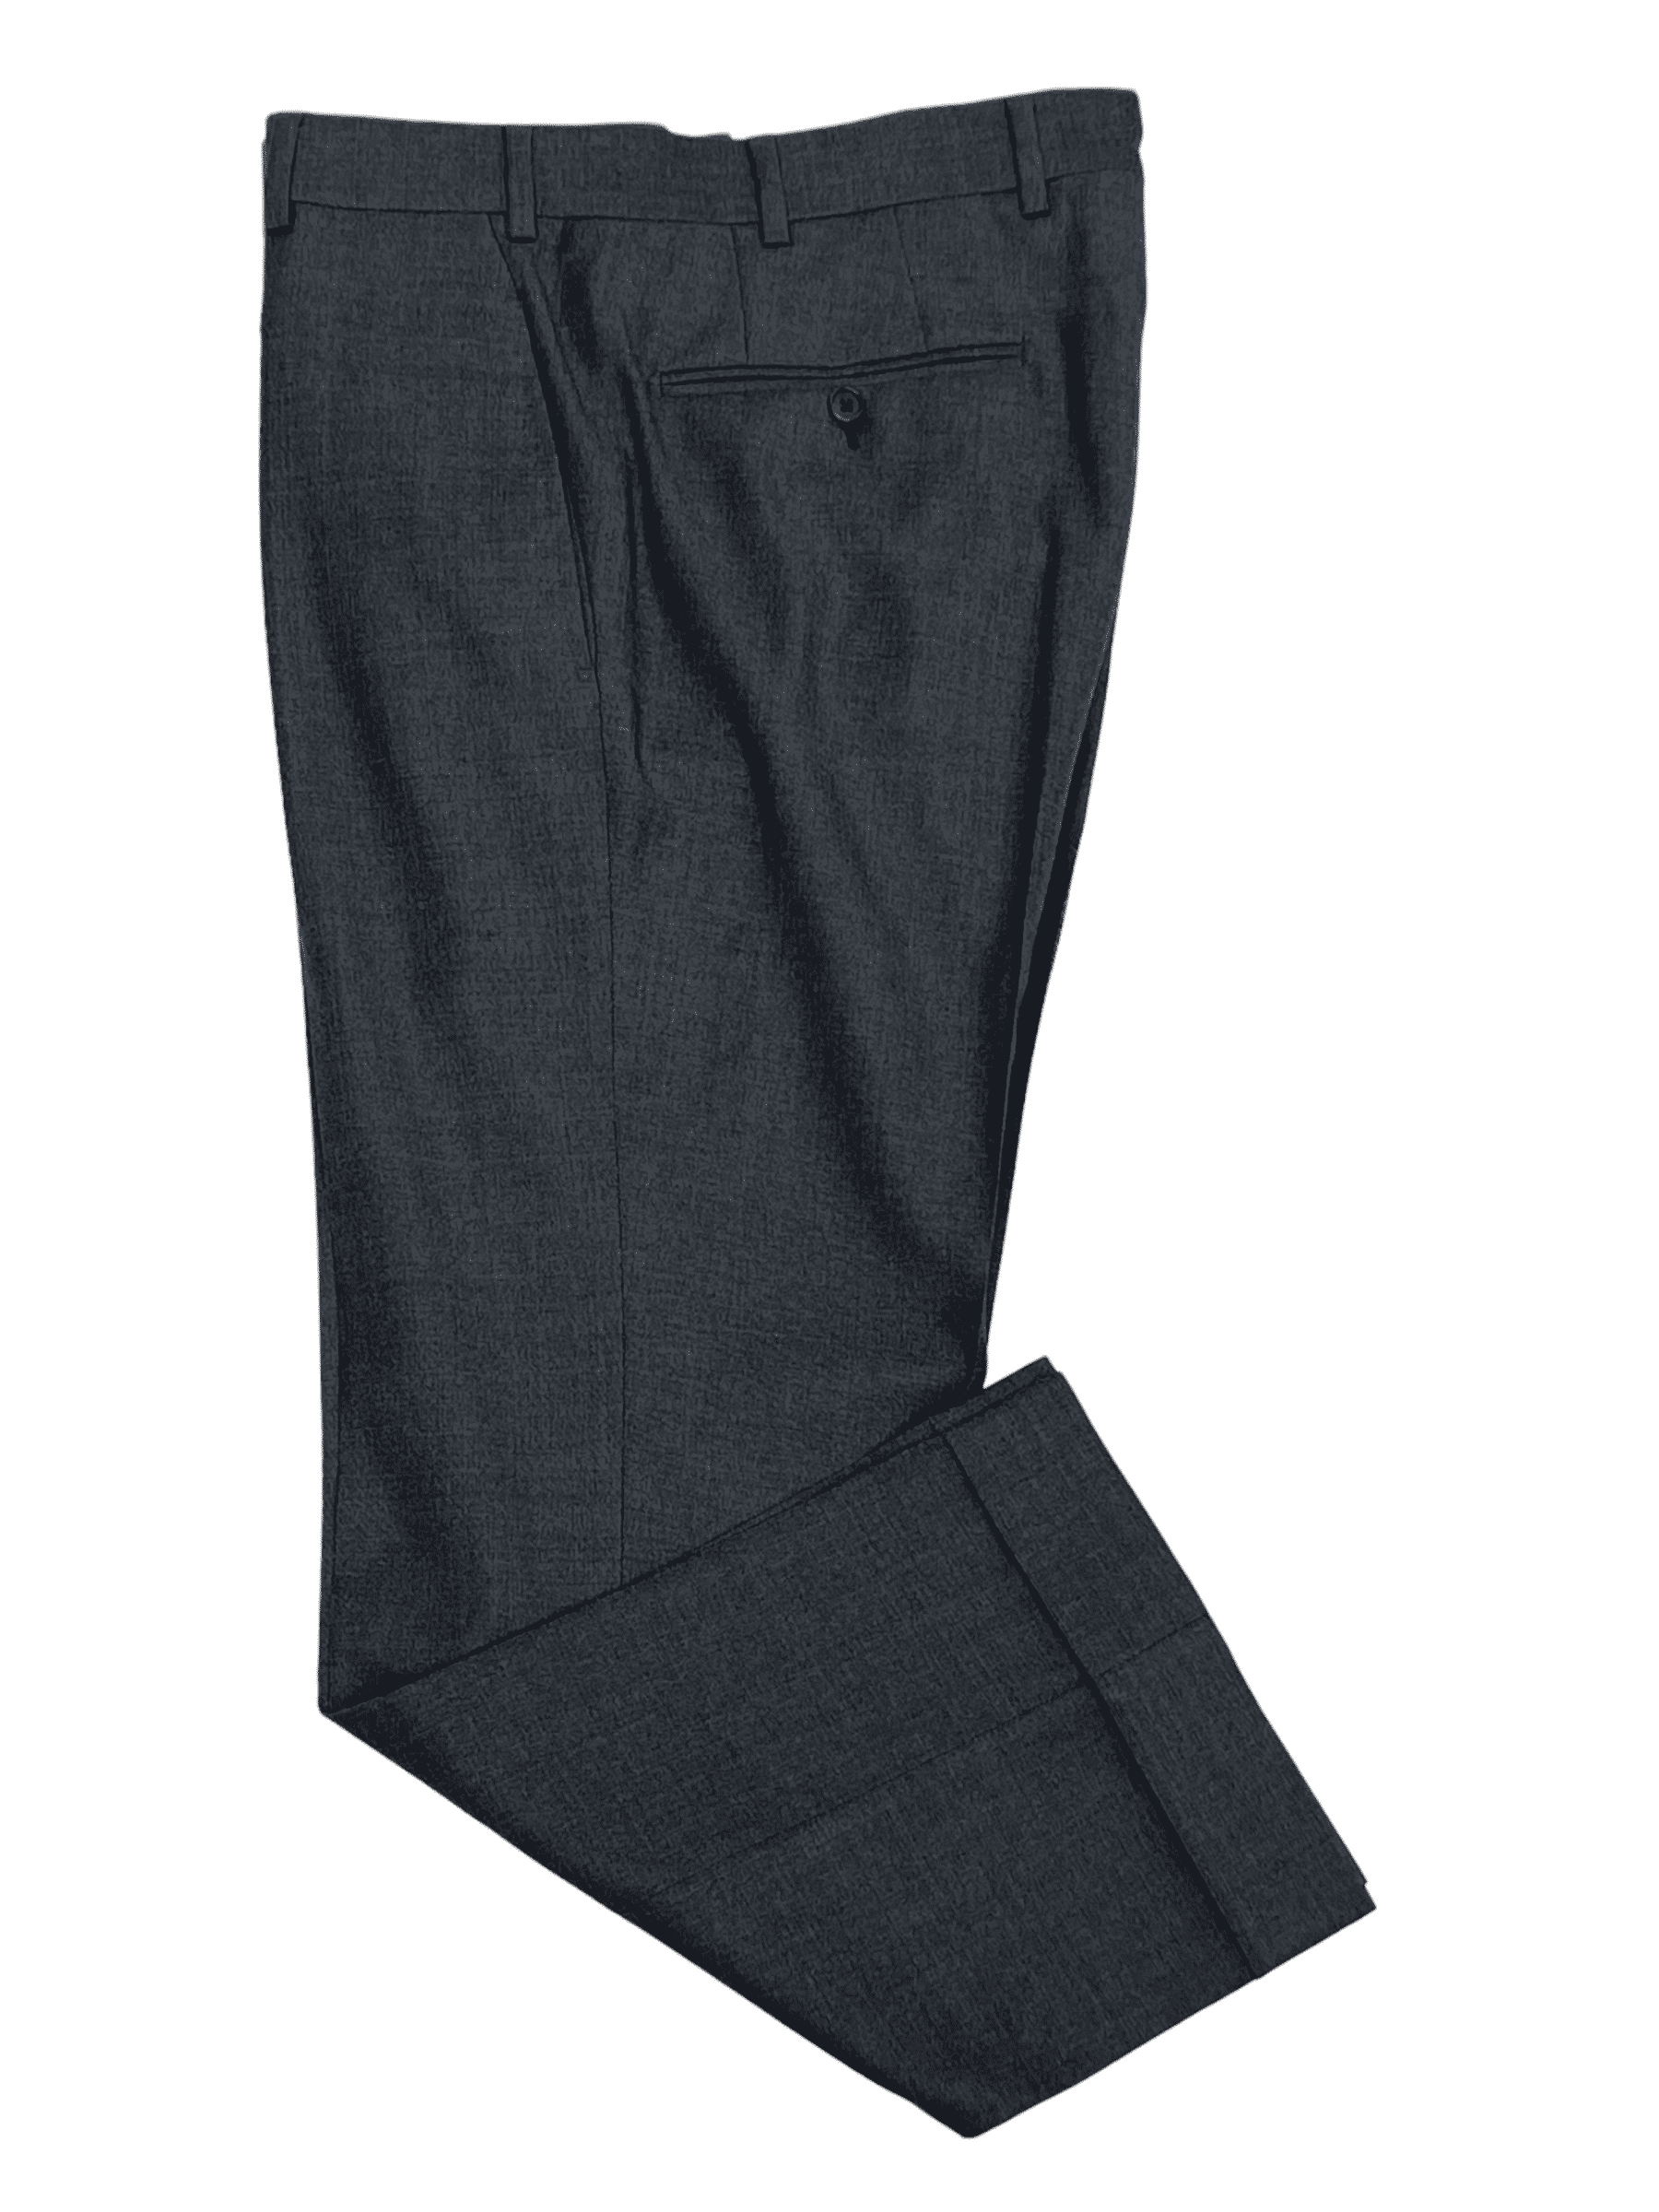 Tom Ford Charcoal Grey Wool Dress Pant 34W 27.5L - Genuine Design Luxury Consignment Calgary, Alberta, Canada New and Pre-Owned Clothing, Shoes, Accessories.